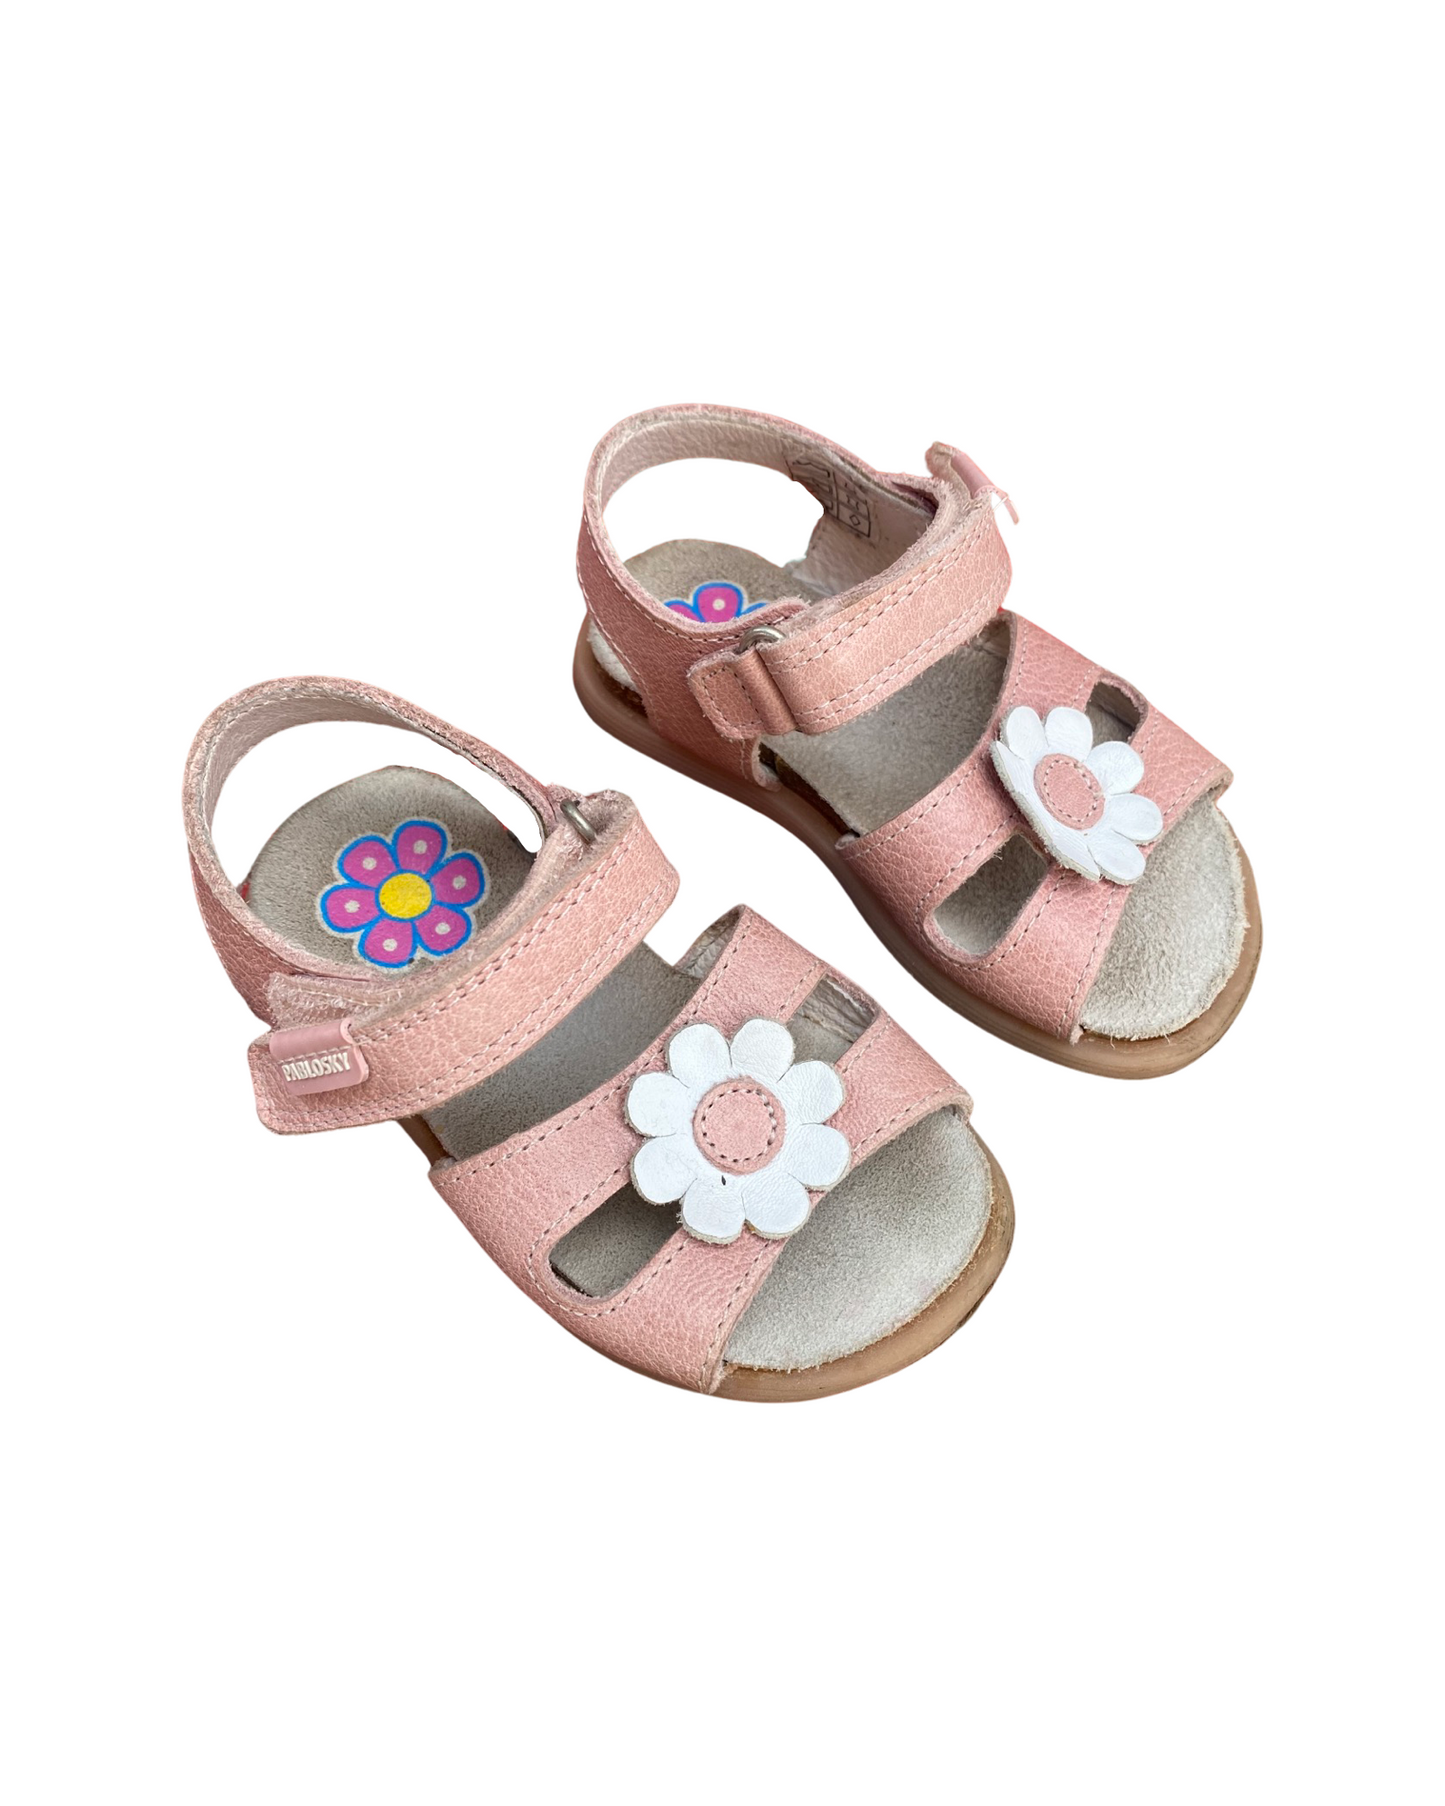 Pablosky pink leather baby sandals (size EU21/UK5)